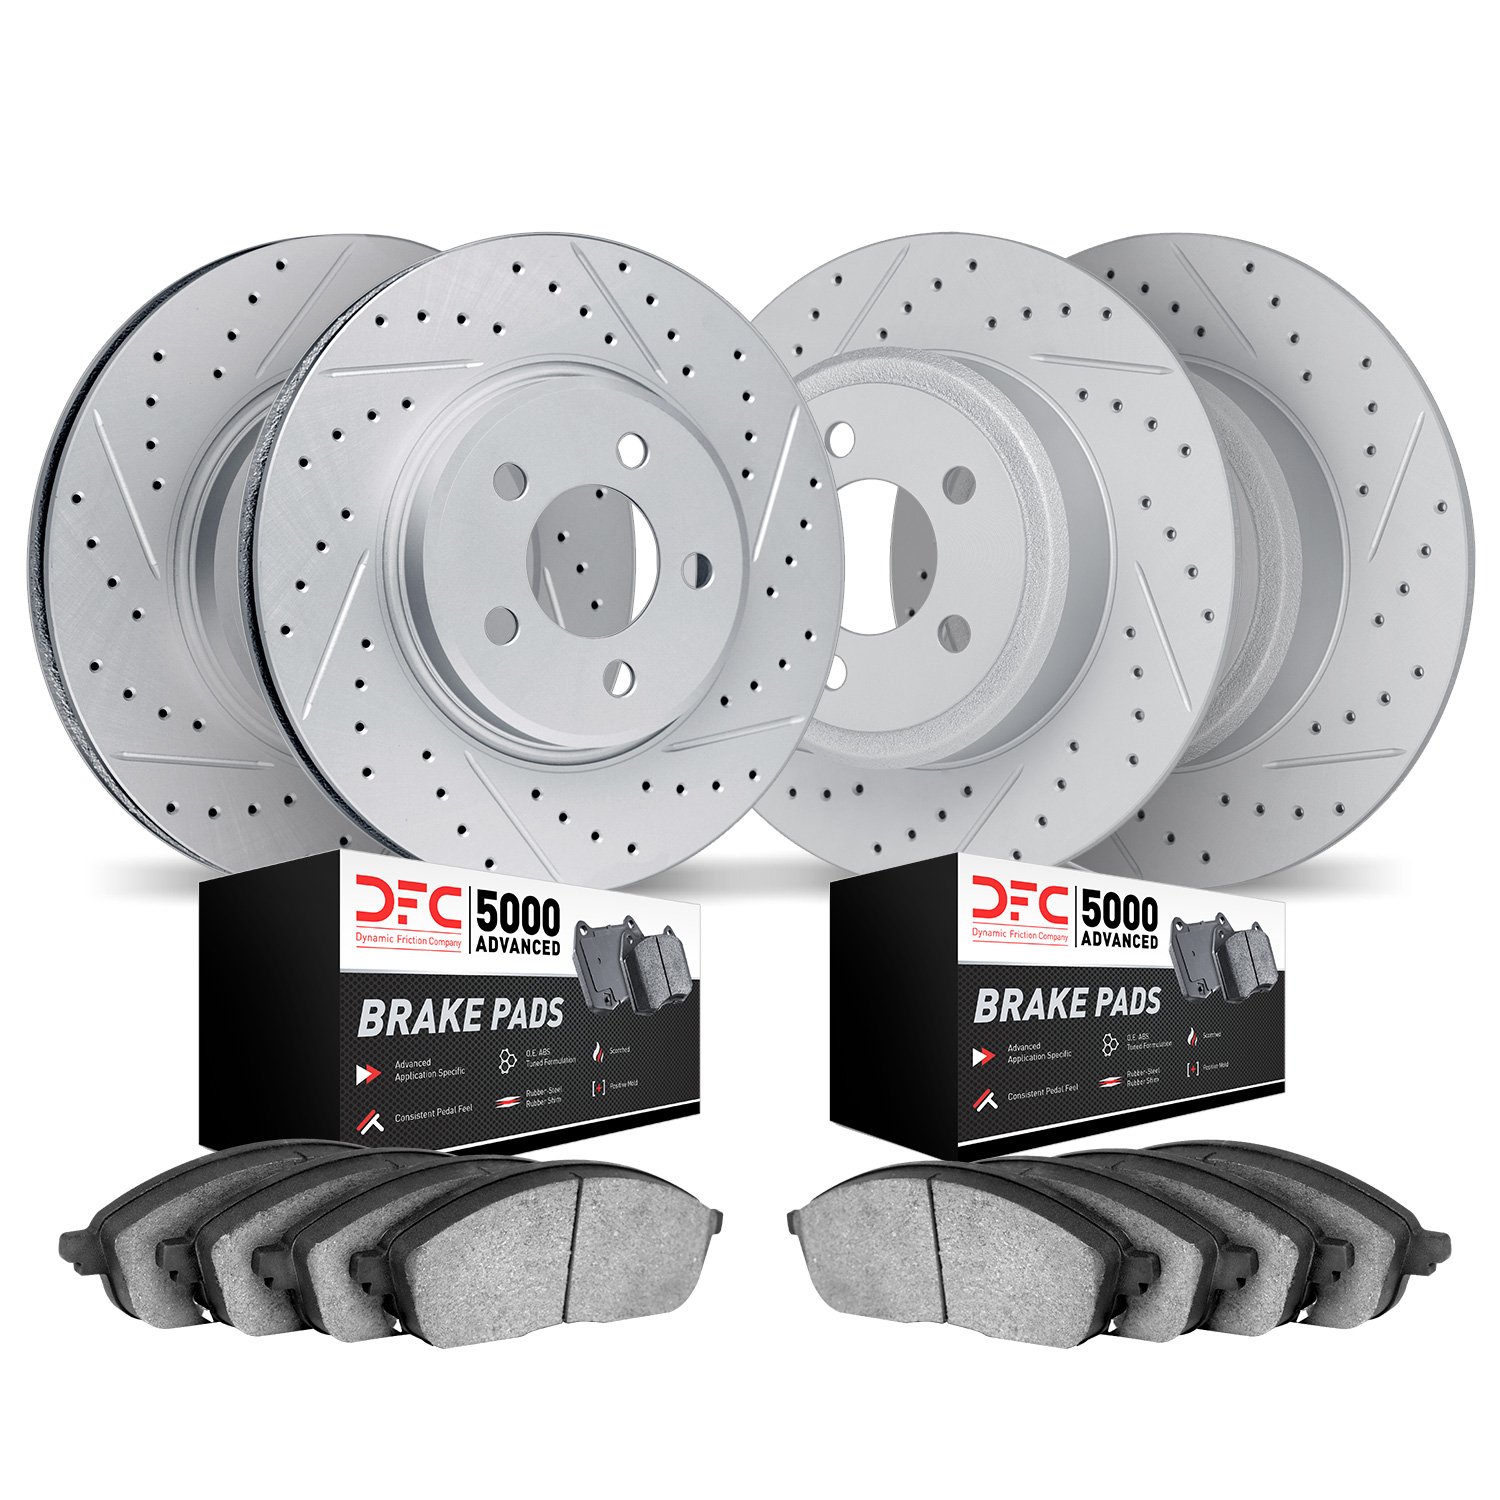 2504-76099 Geoperformance Drilled/Slotted Rotors w/5000 Advanced Brake Pads Kit, 2004-2008 Lexus/Toyota/Scion, Position: Front a